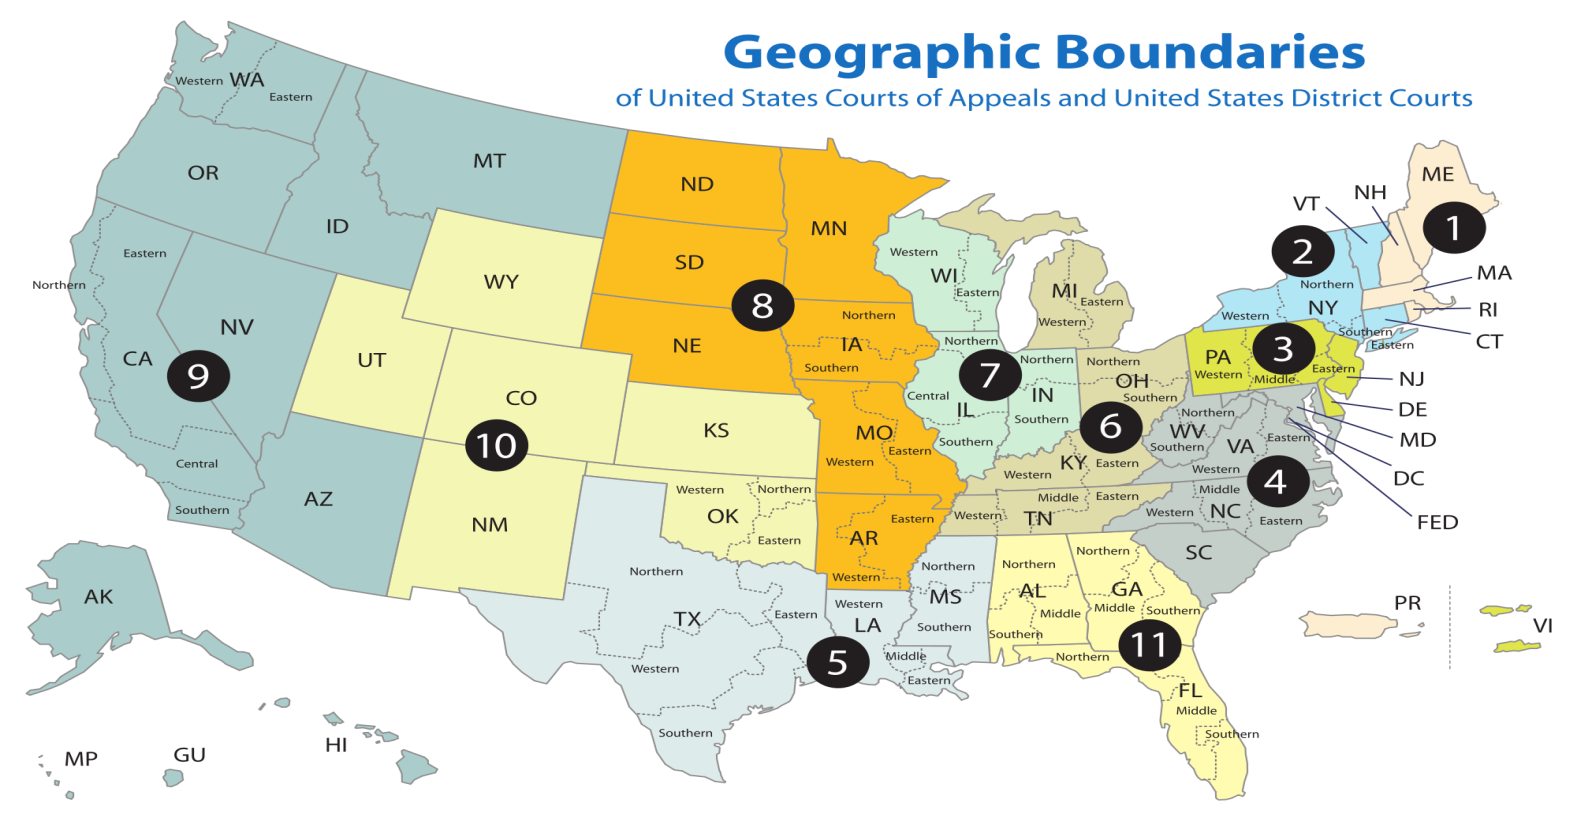 Geographic Boundaries, Court of Appeals, District courts